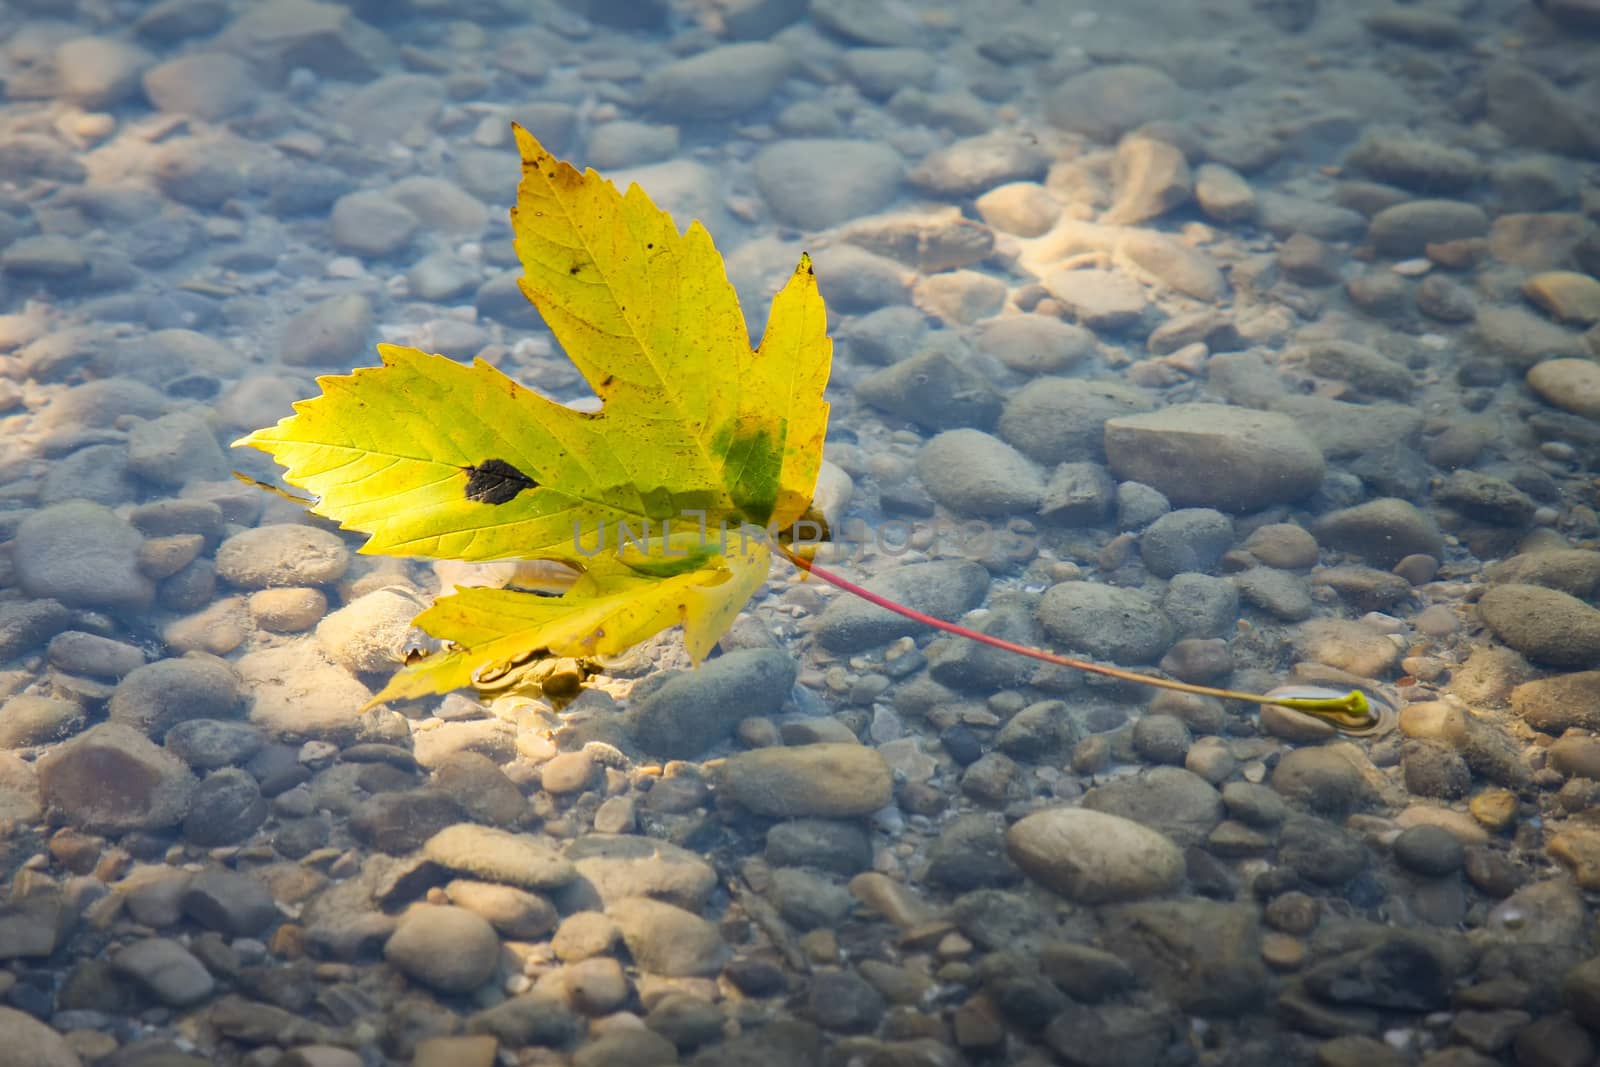 An image of one autumn leaf in the water